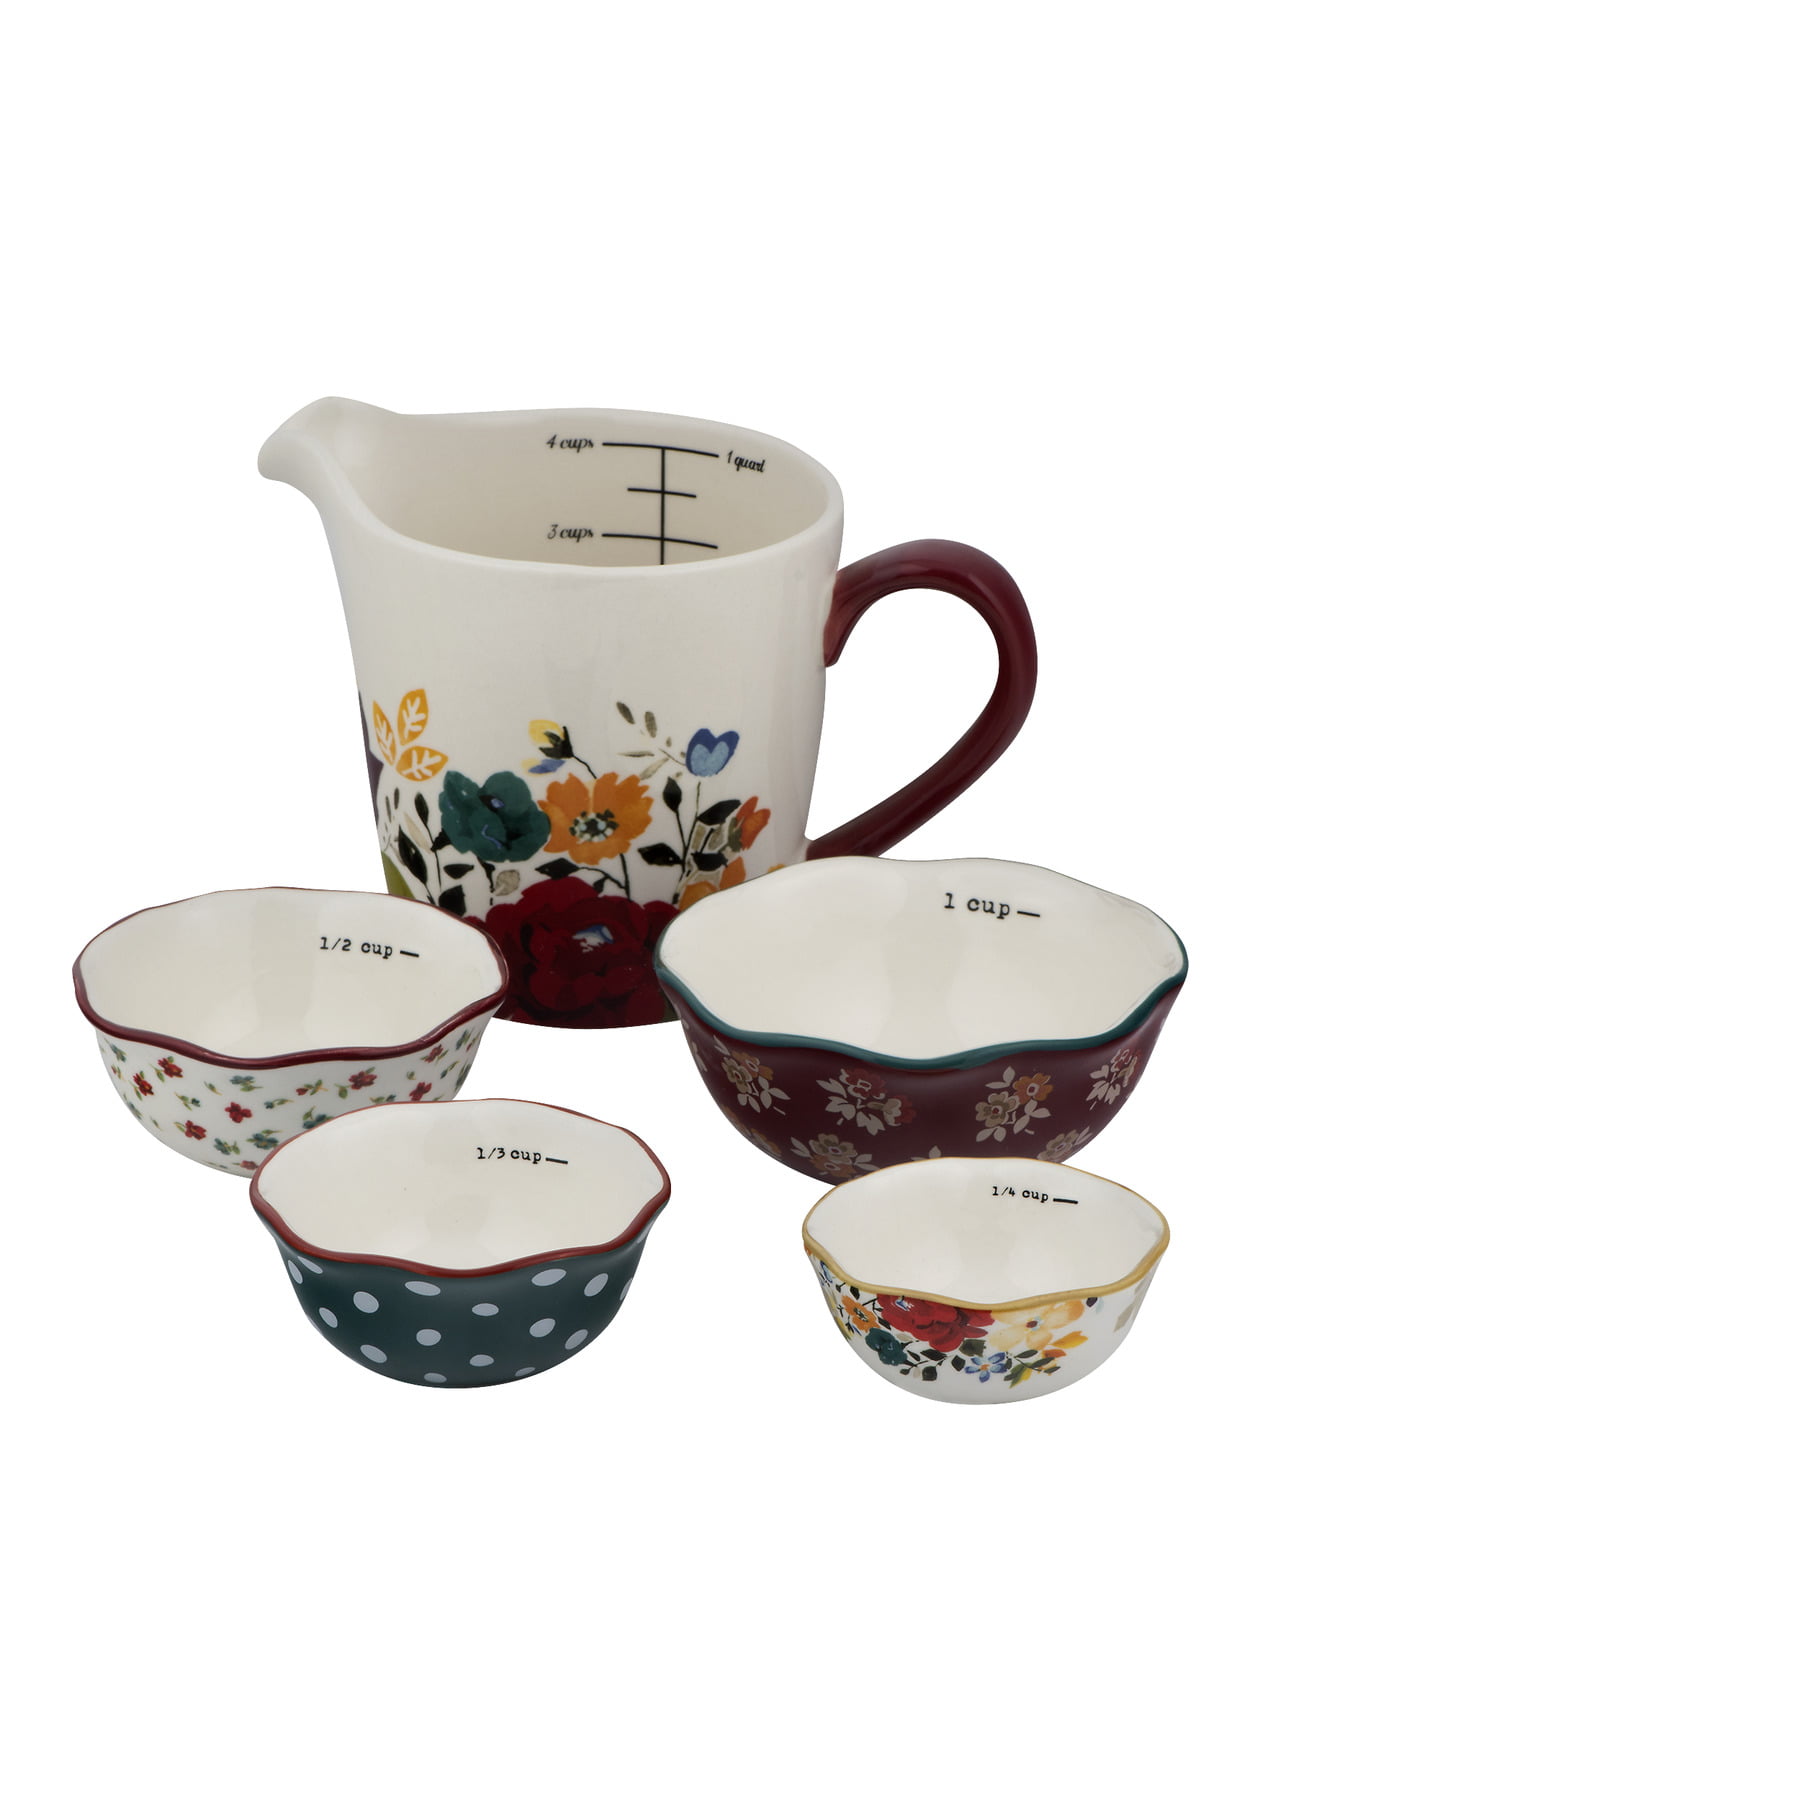 The Pioneer Woman Measuring Cups - Set of 4